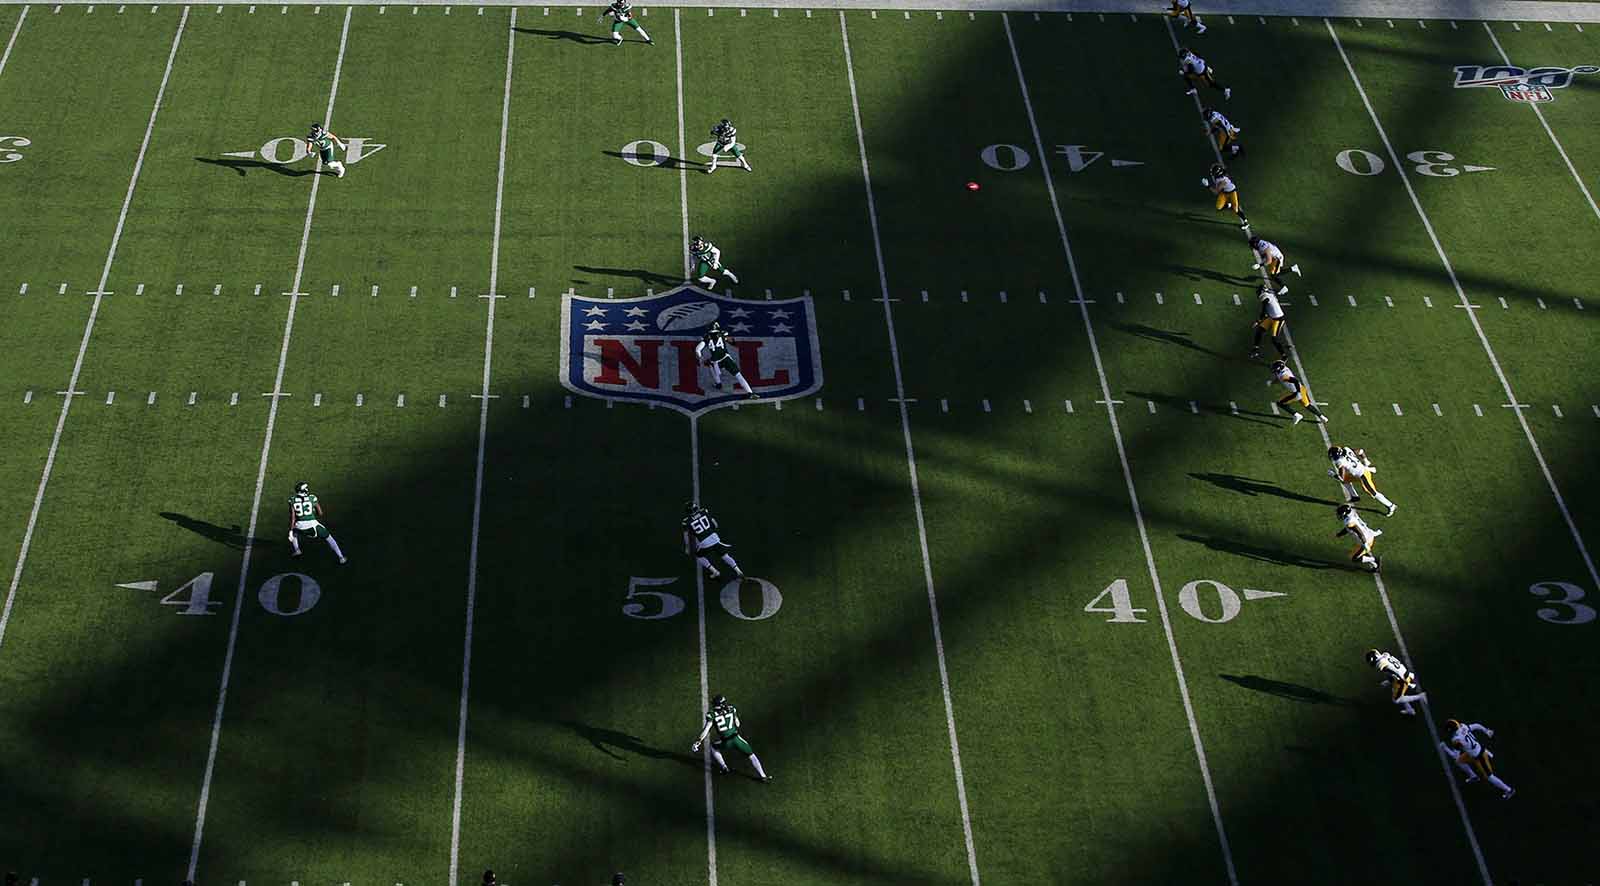 Nfl Streams Reddit When Will Nfl Start For Sunday Night Games Film Daily